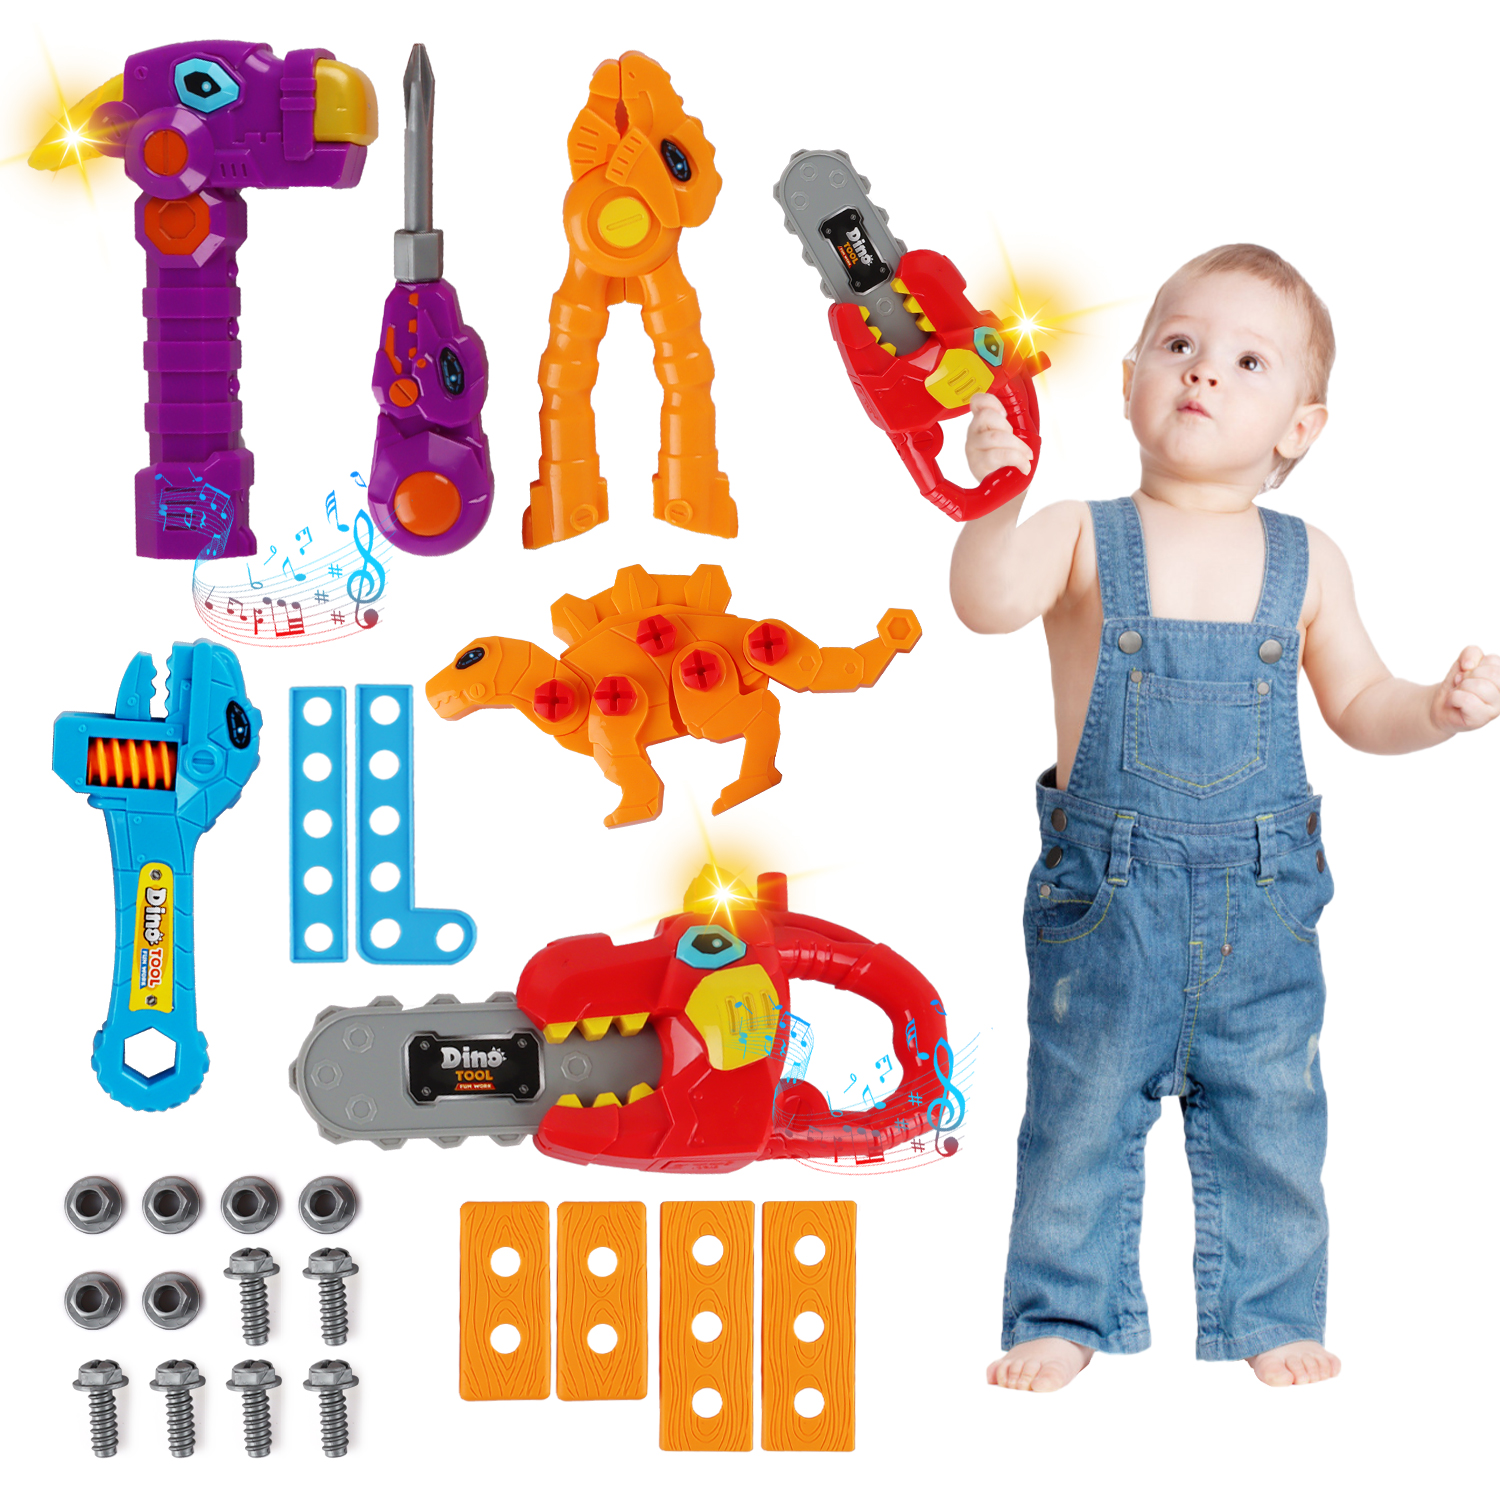 HONYAT Kids Tool Set Dinosaur Shaped - 25 Pieces Construction Toys Tool Include Hammer, Screwdrivers, Chainsaw and Adjustable Wrench, Sound and Light Dino Stem Pretend Play for Boys and Girls